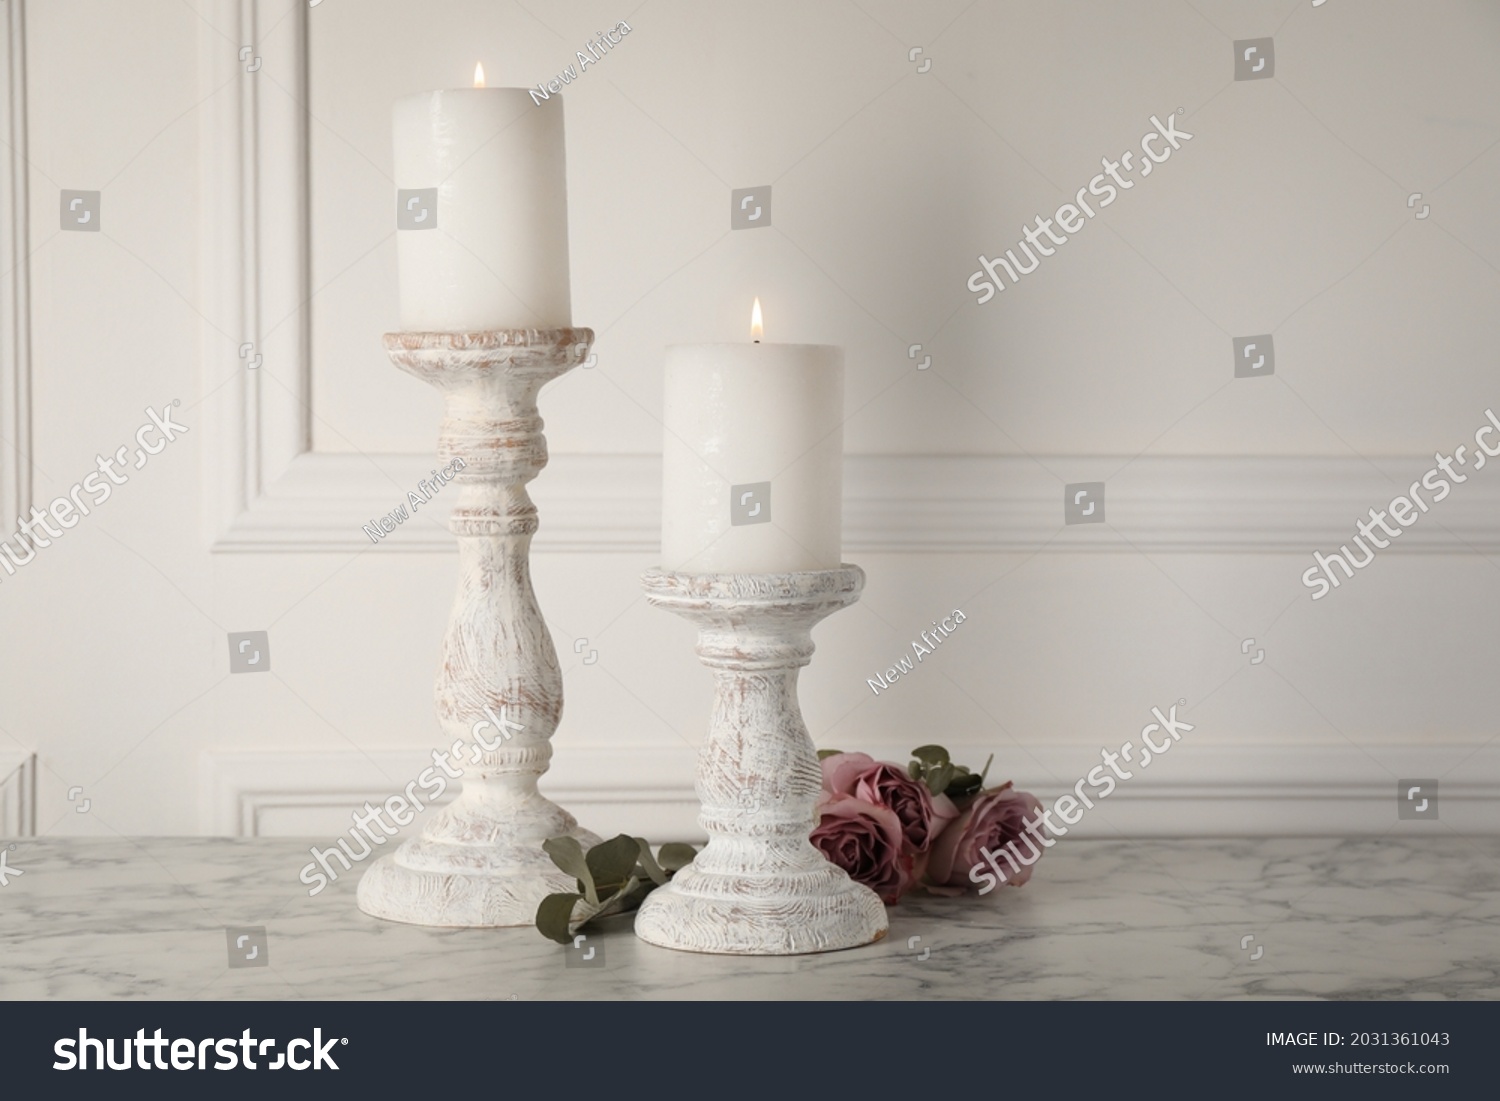 Elegant candlesticks with burning candles and flowers on white marble table #2031361043